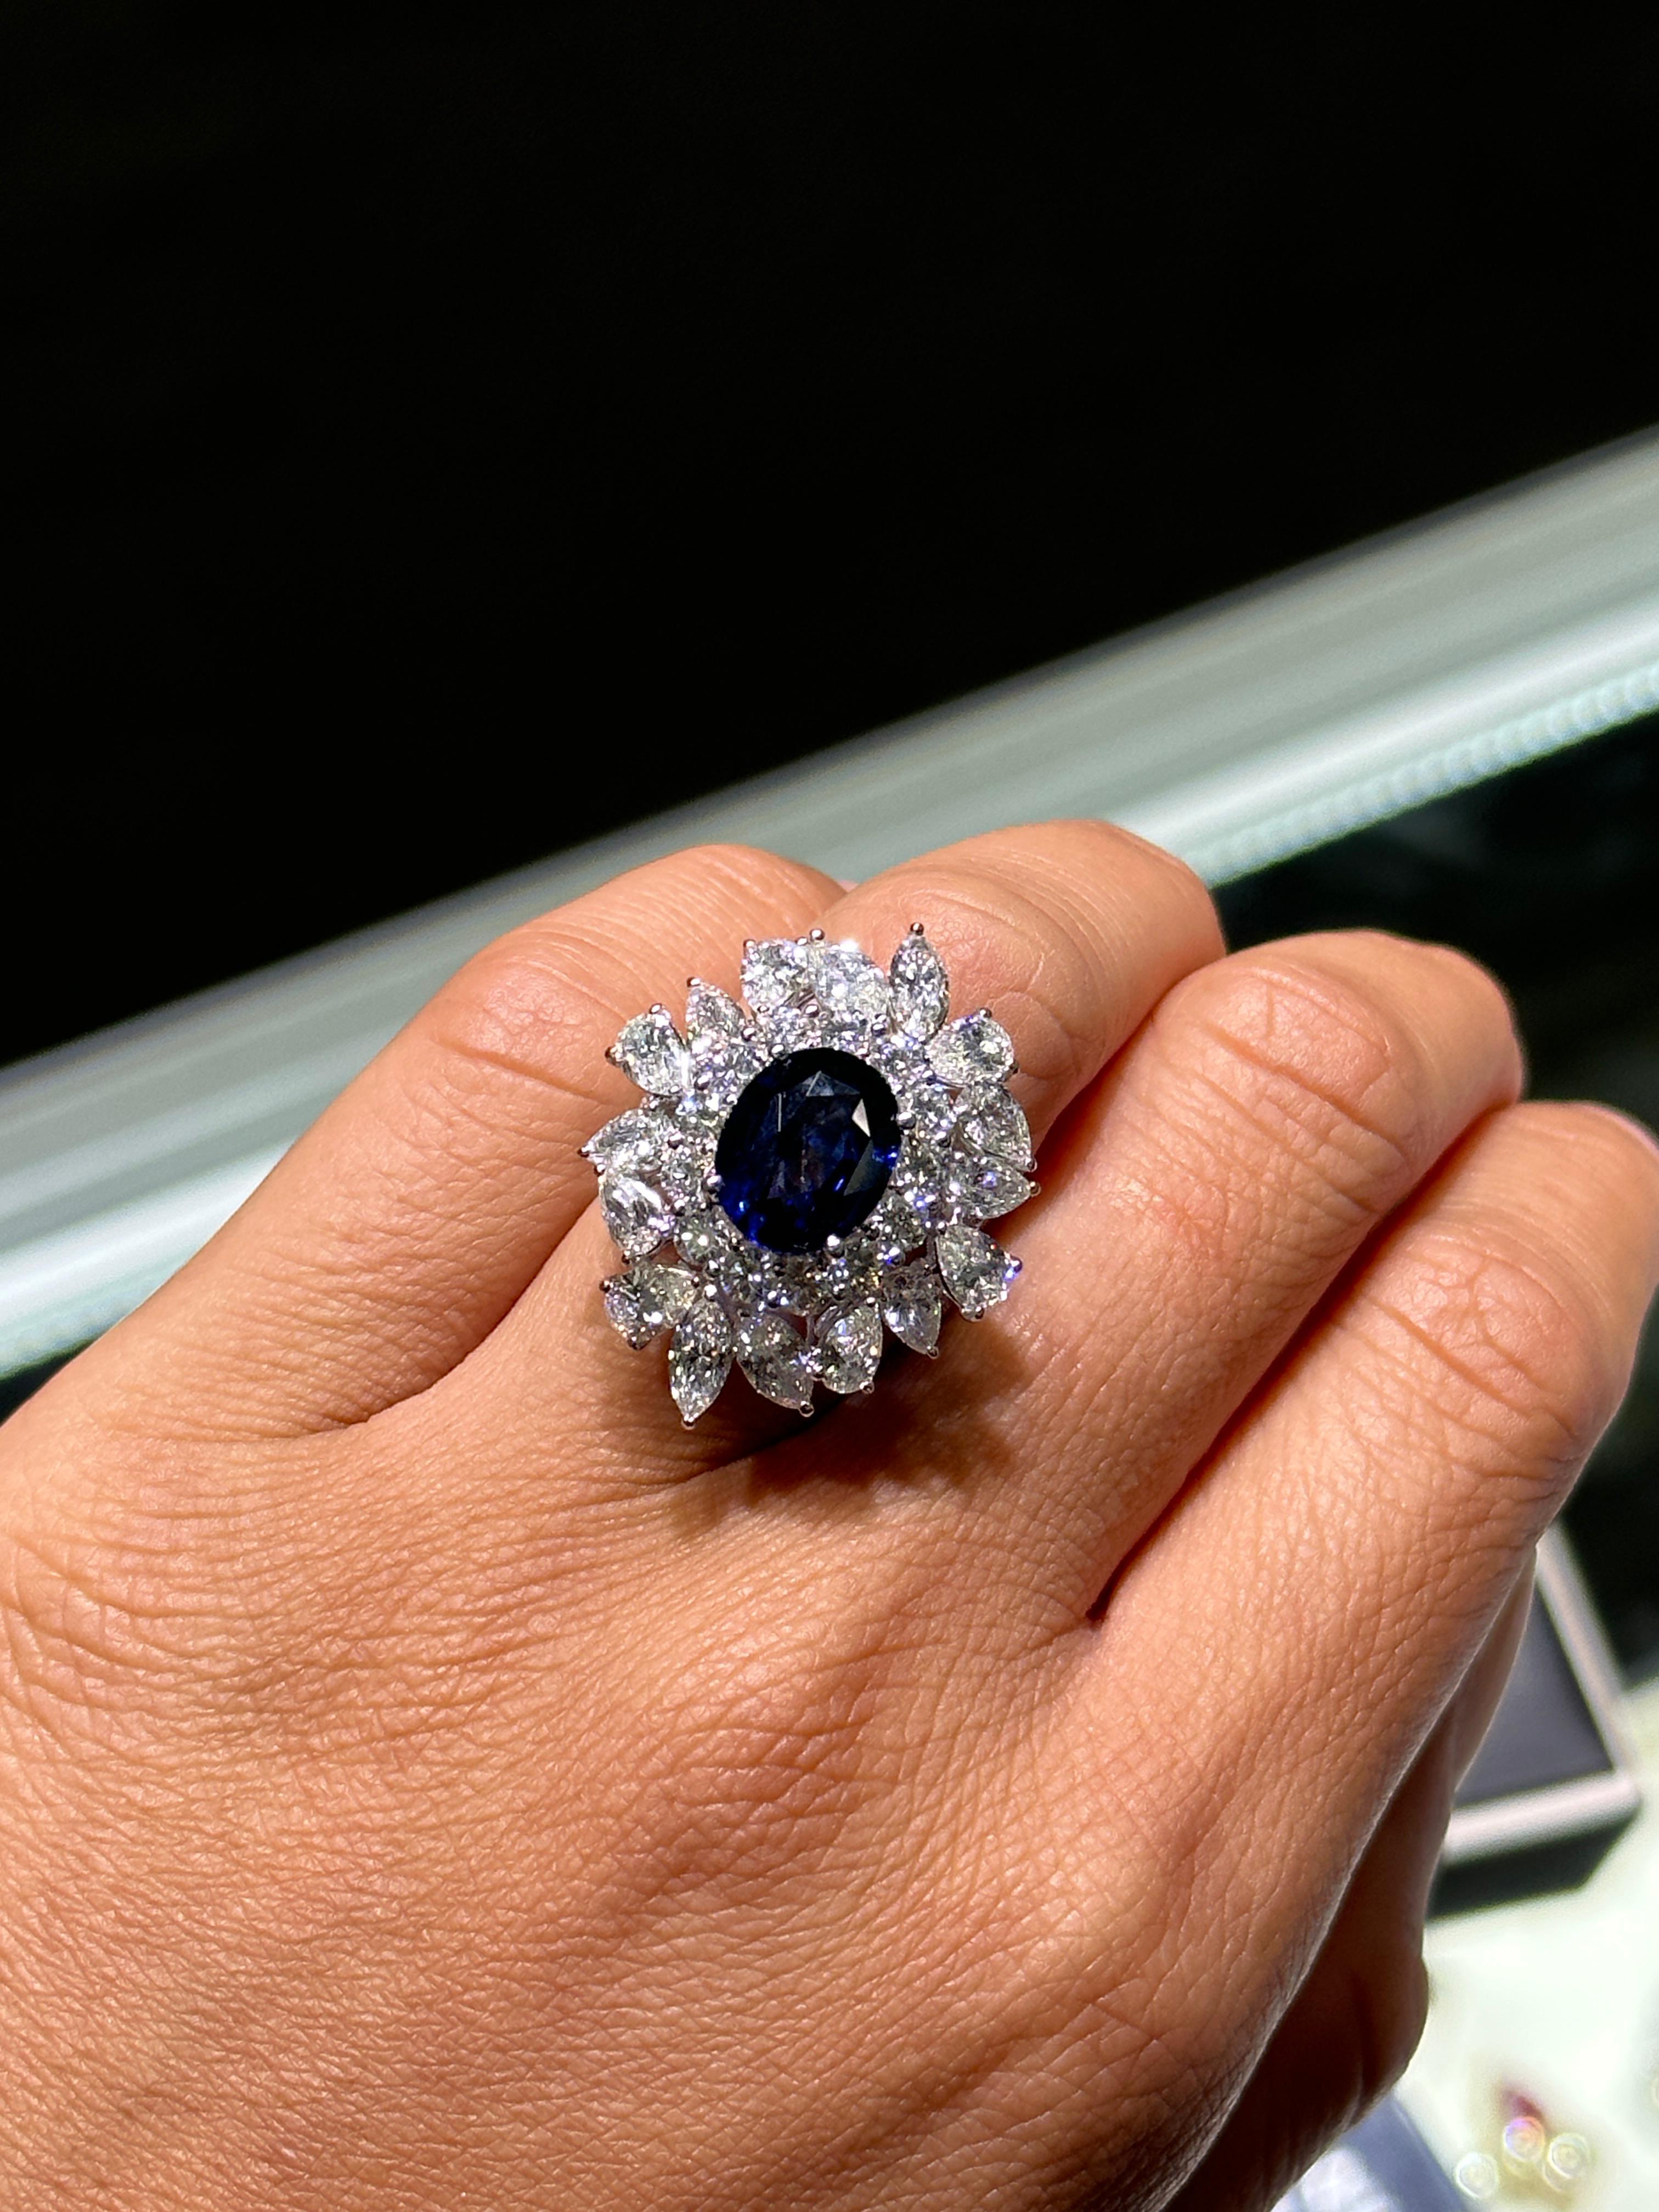 The Following Item we are offering is a Rare Important Radiant 18KT Gold Large Rare Fancy Ceylon Blue Sapphire and Diamond Ring. Ring is comprised of Gorgeous Blue Sapphires Spectacularly Set in and surrounded by Magnificent Glittering Fancy Cut